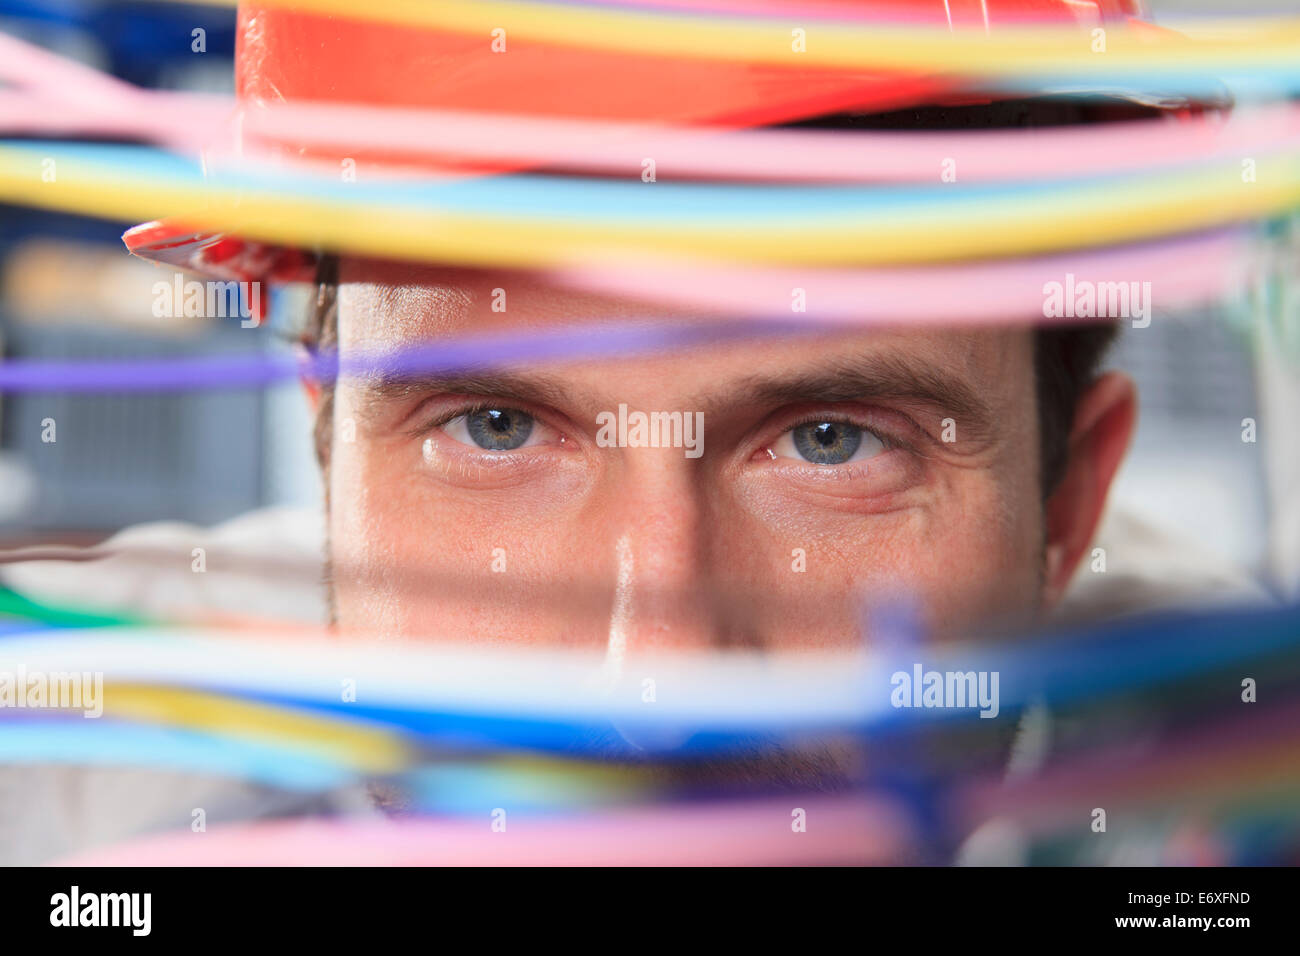 Network engineer examining multi color fiber and copper cables in data center Stock Photo